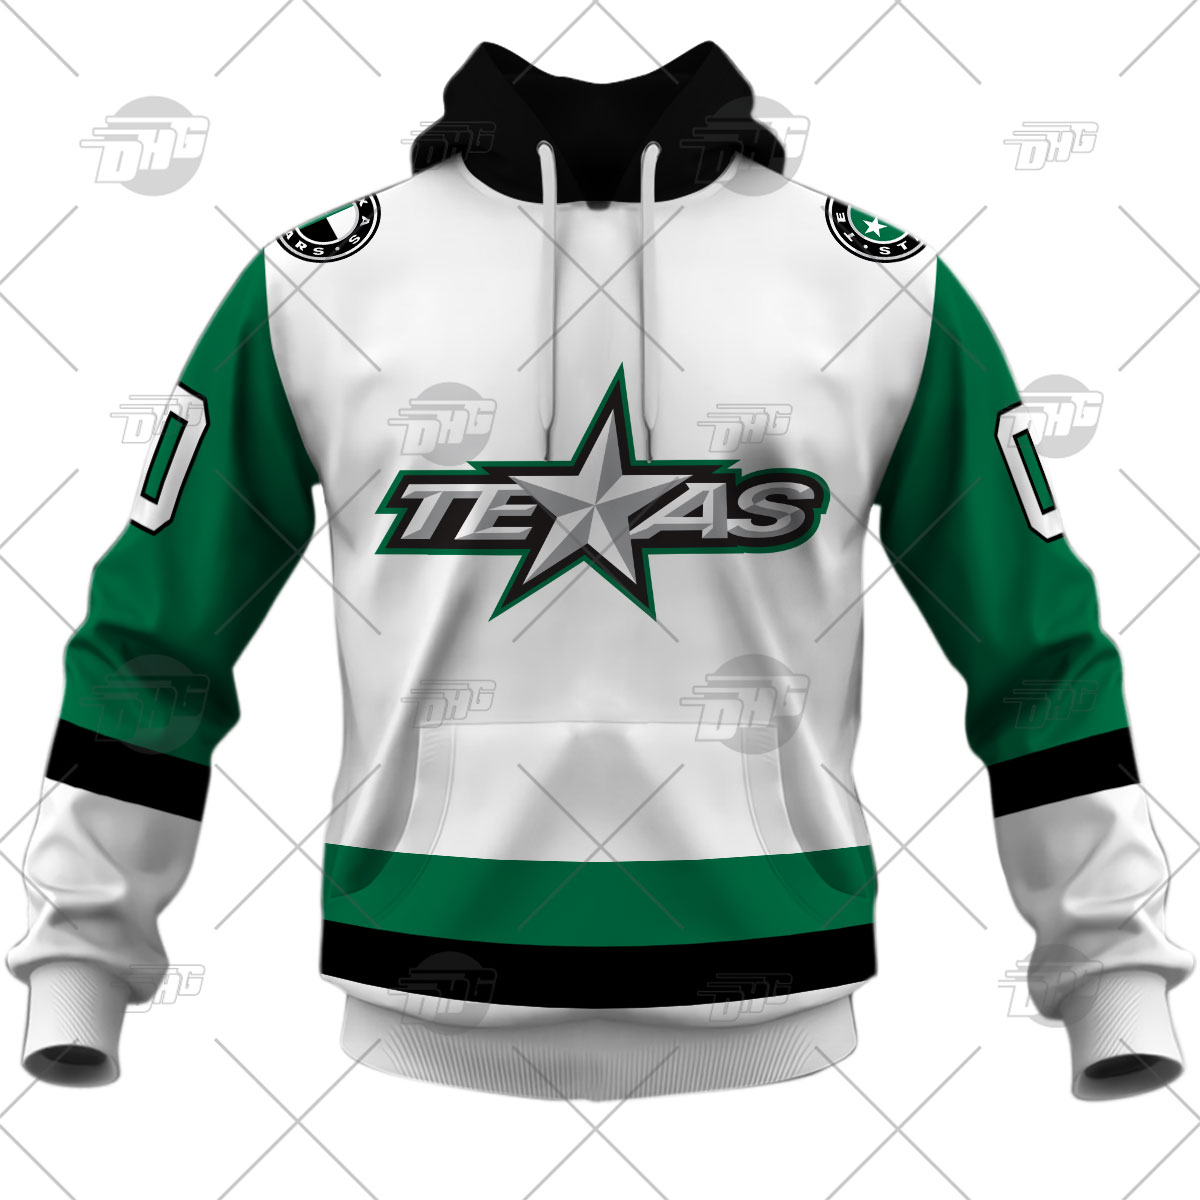 AHL's Stars unveil beautiful new jerseys and pay tribute to Texas